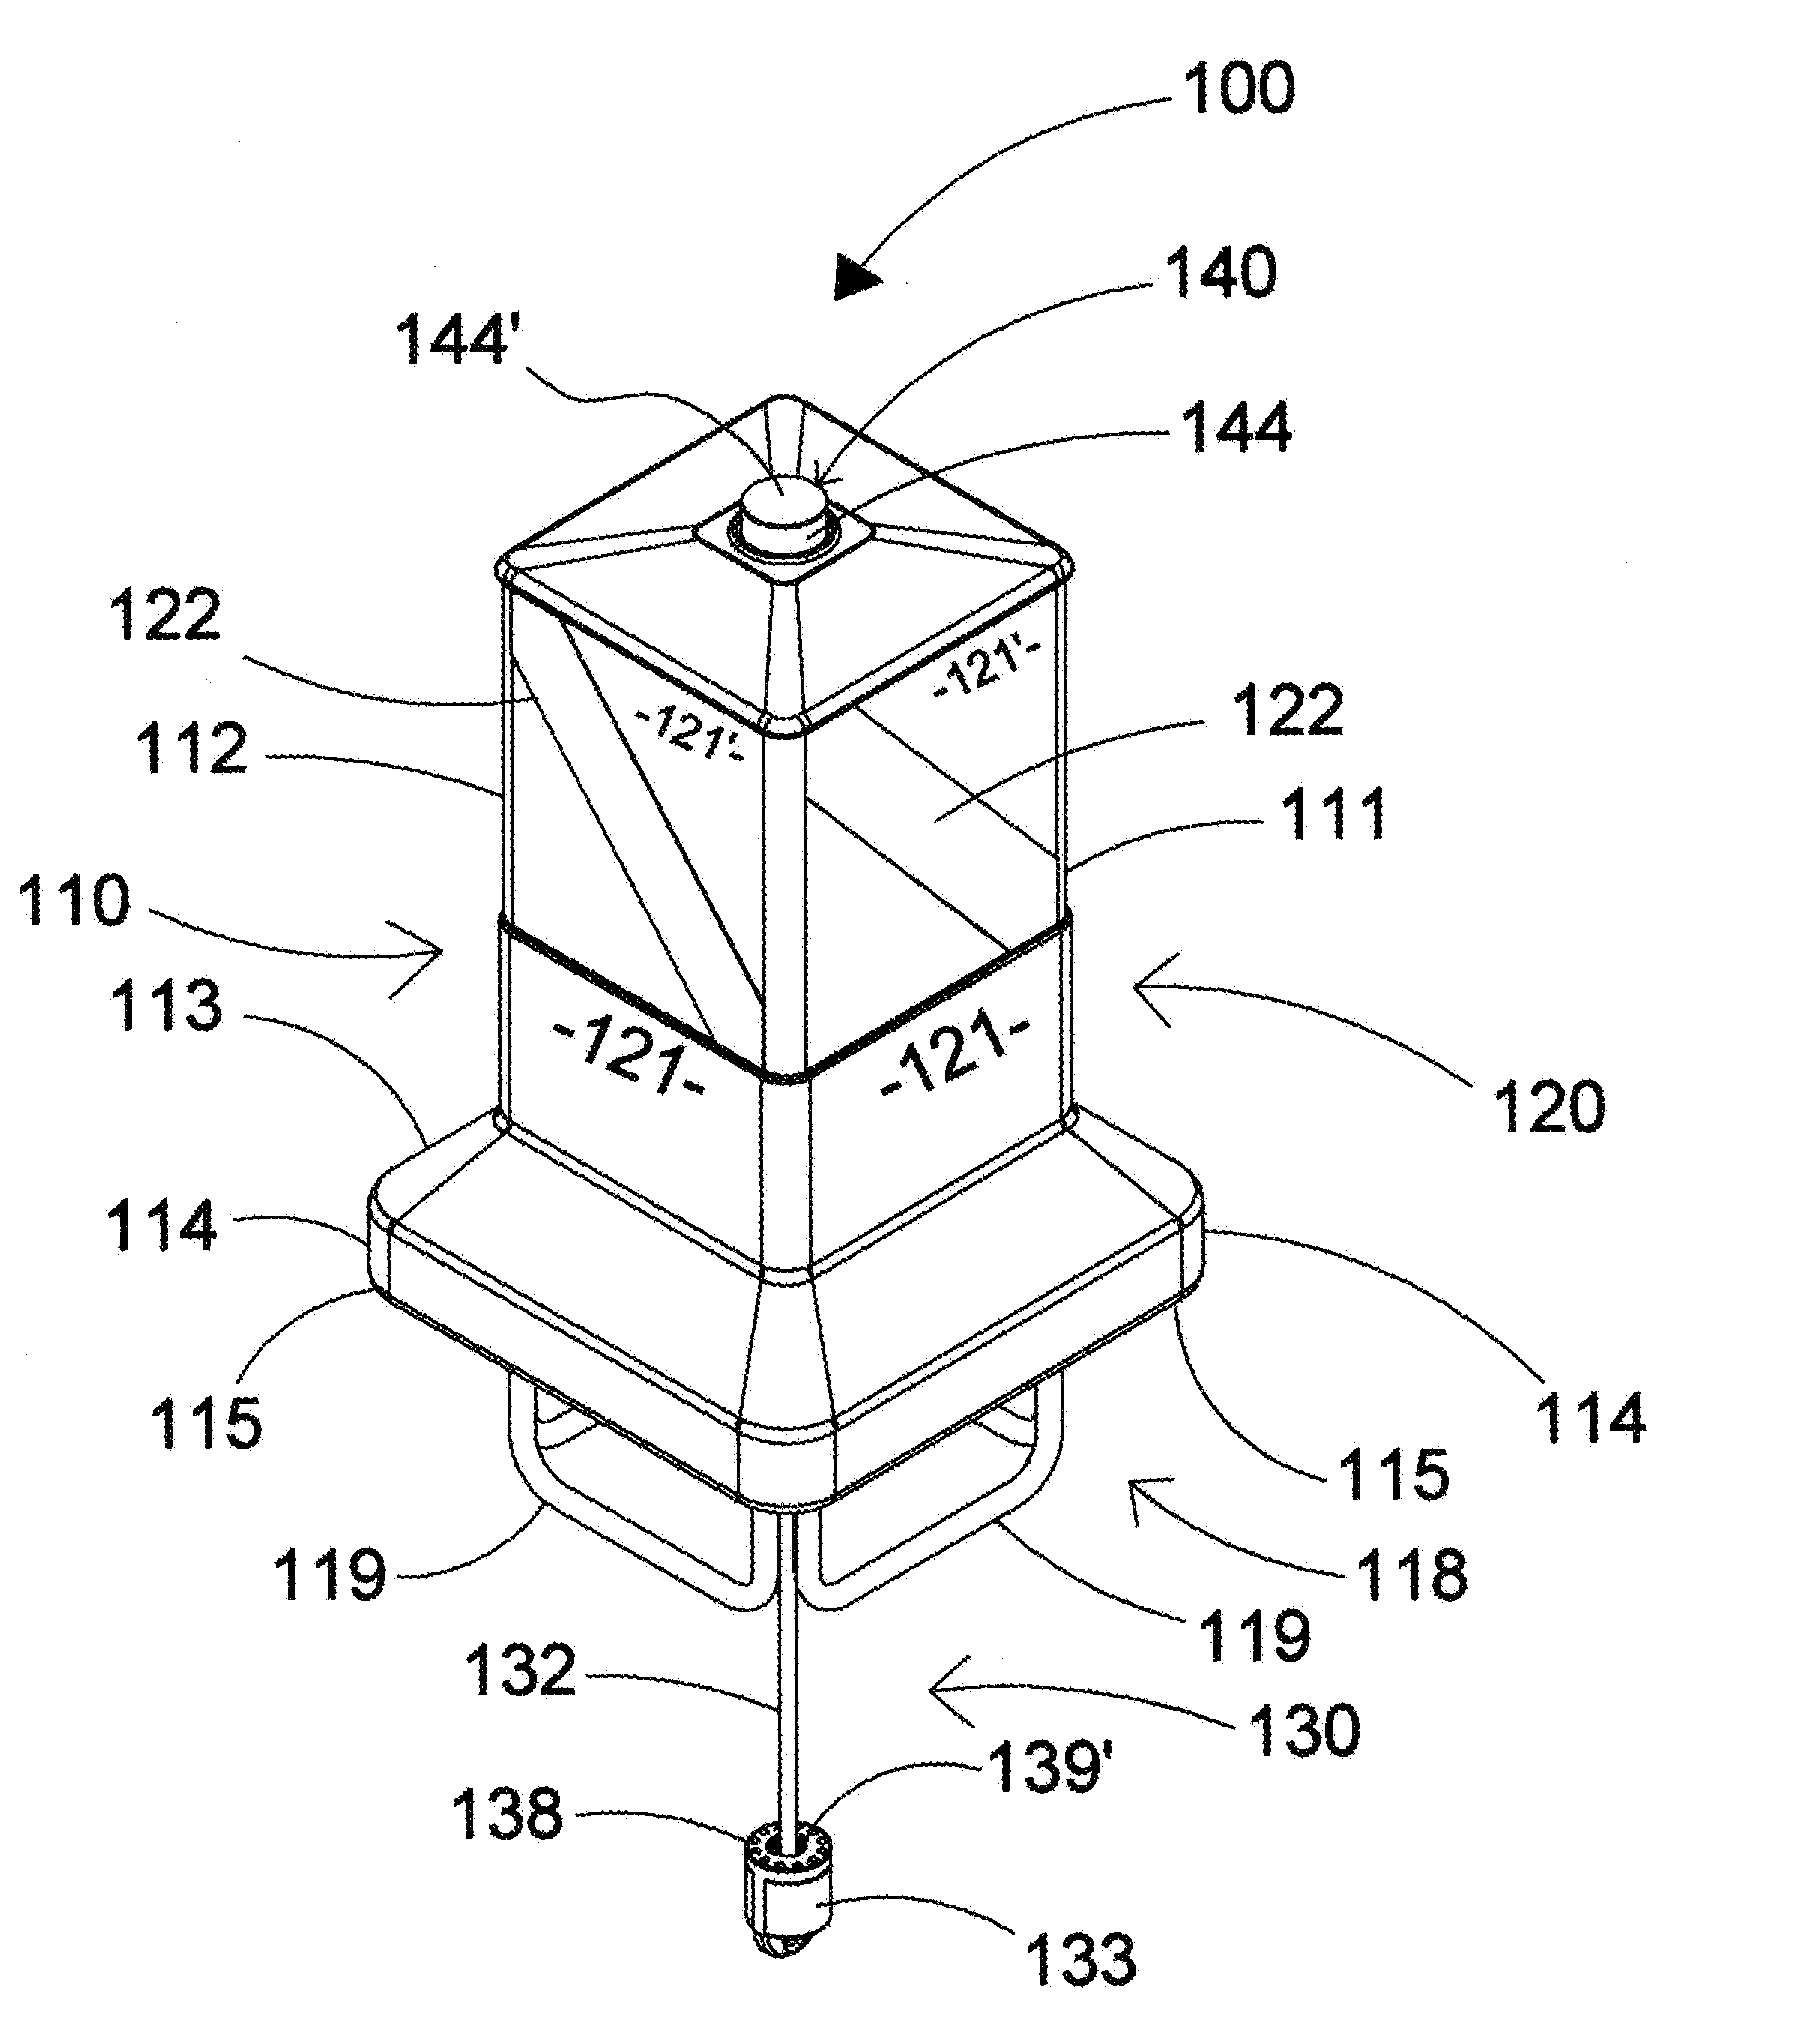 Multi-directional signal assembly